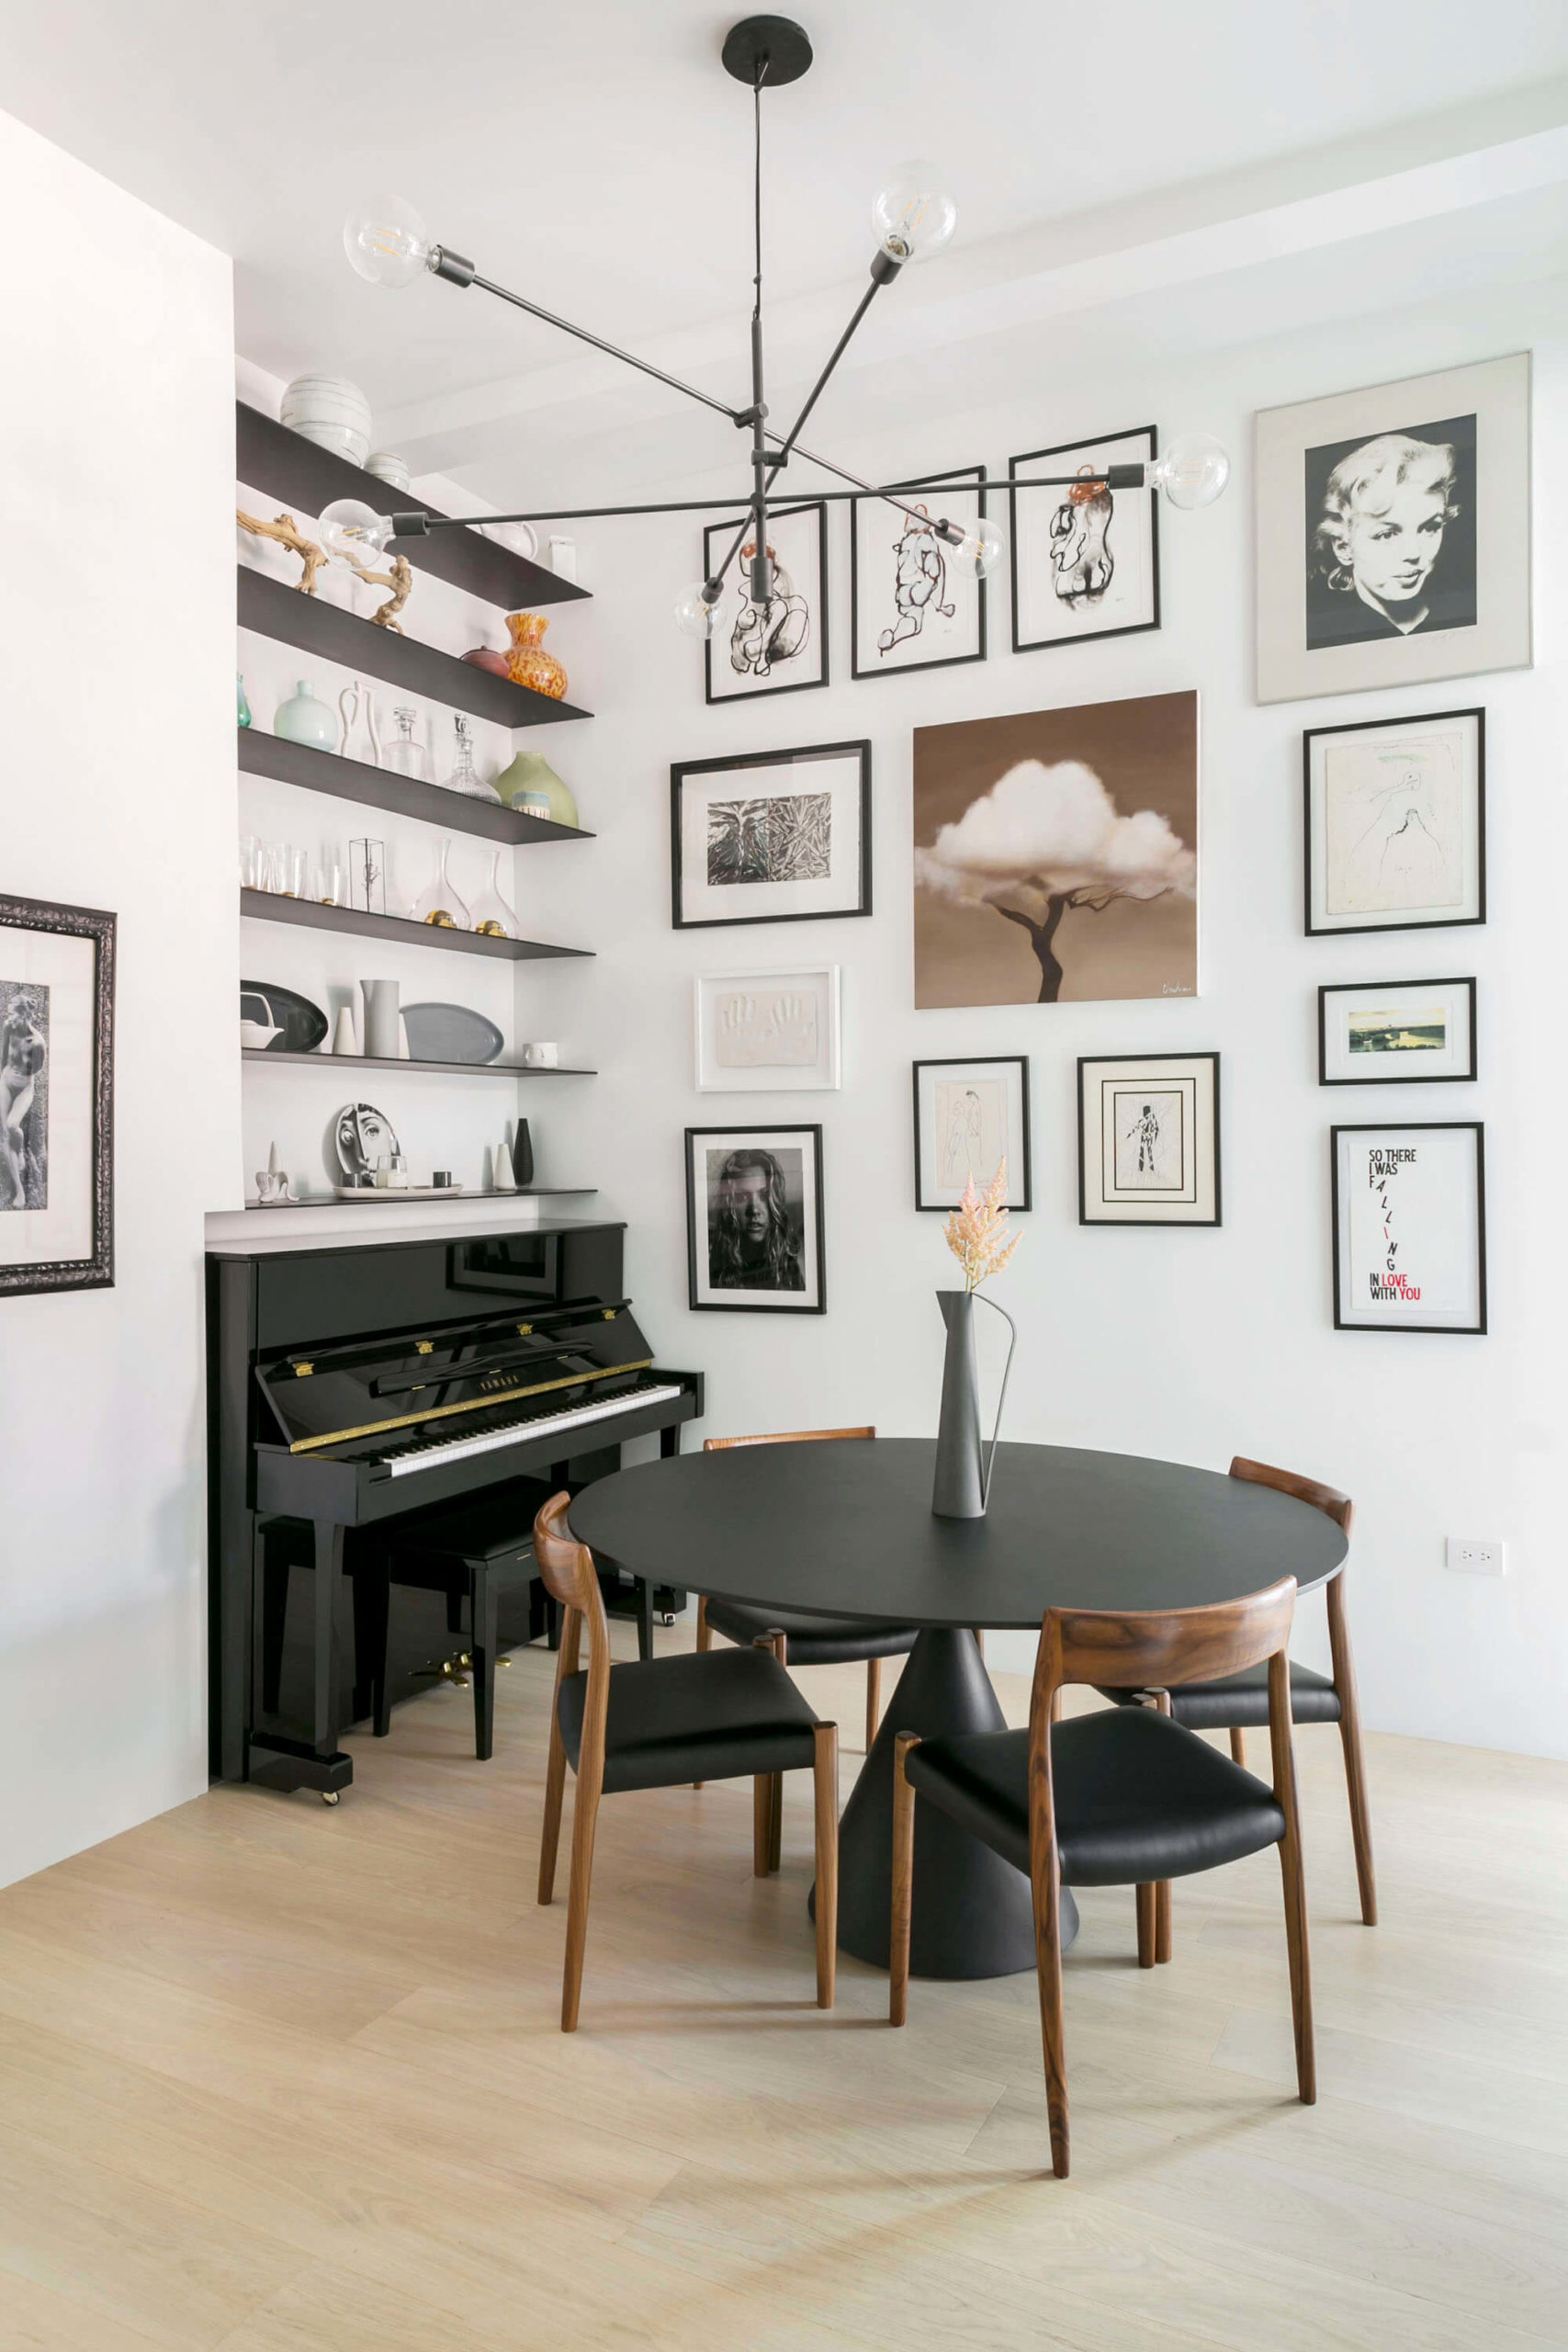 dining area with gallery wall and open shelves above a piano